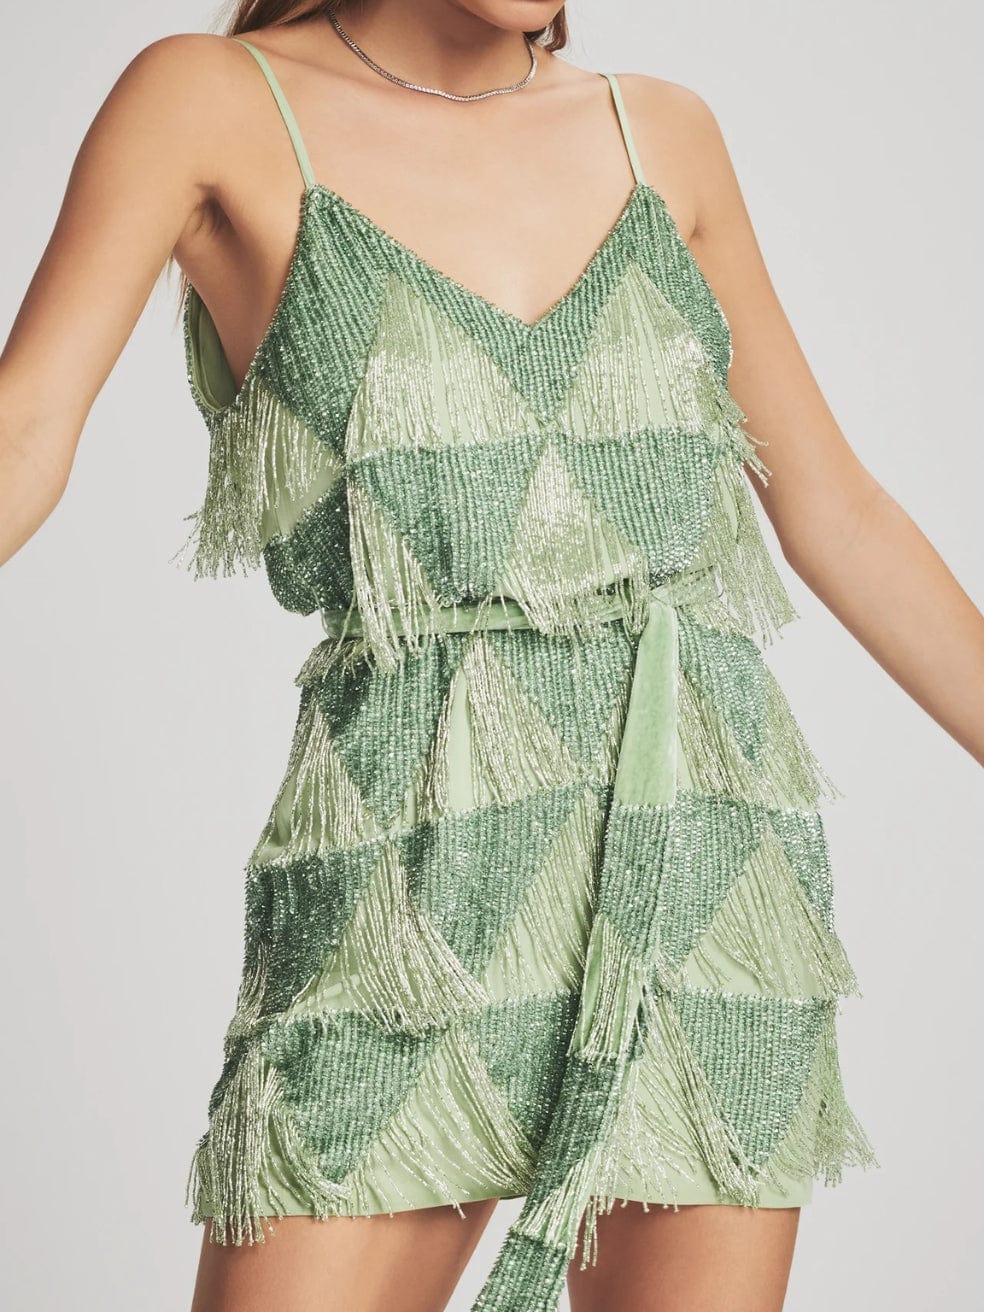 Claire Sequin Fringe Dress in Green